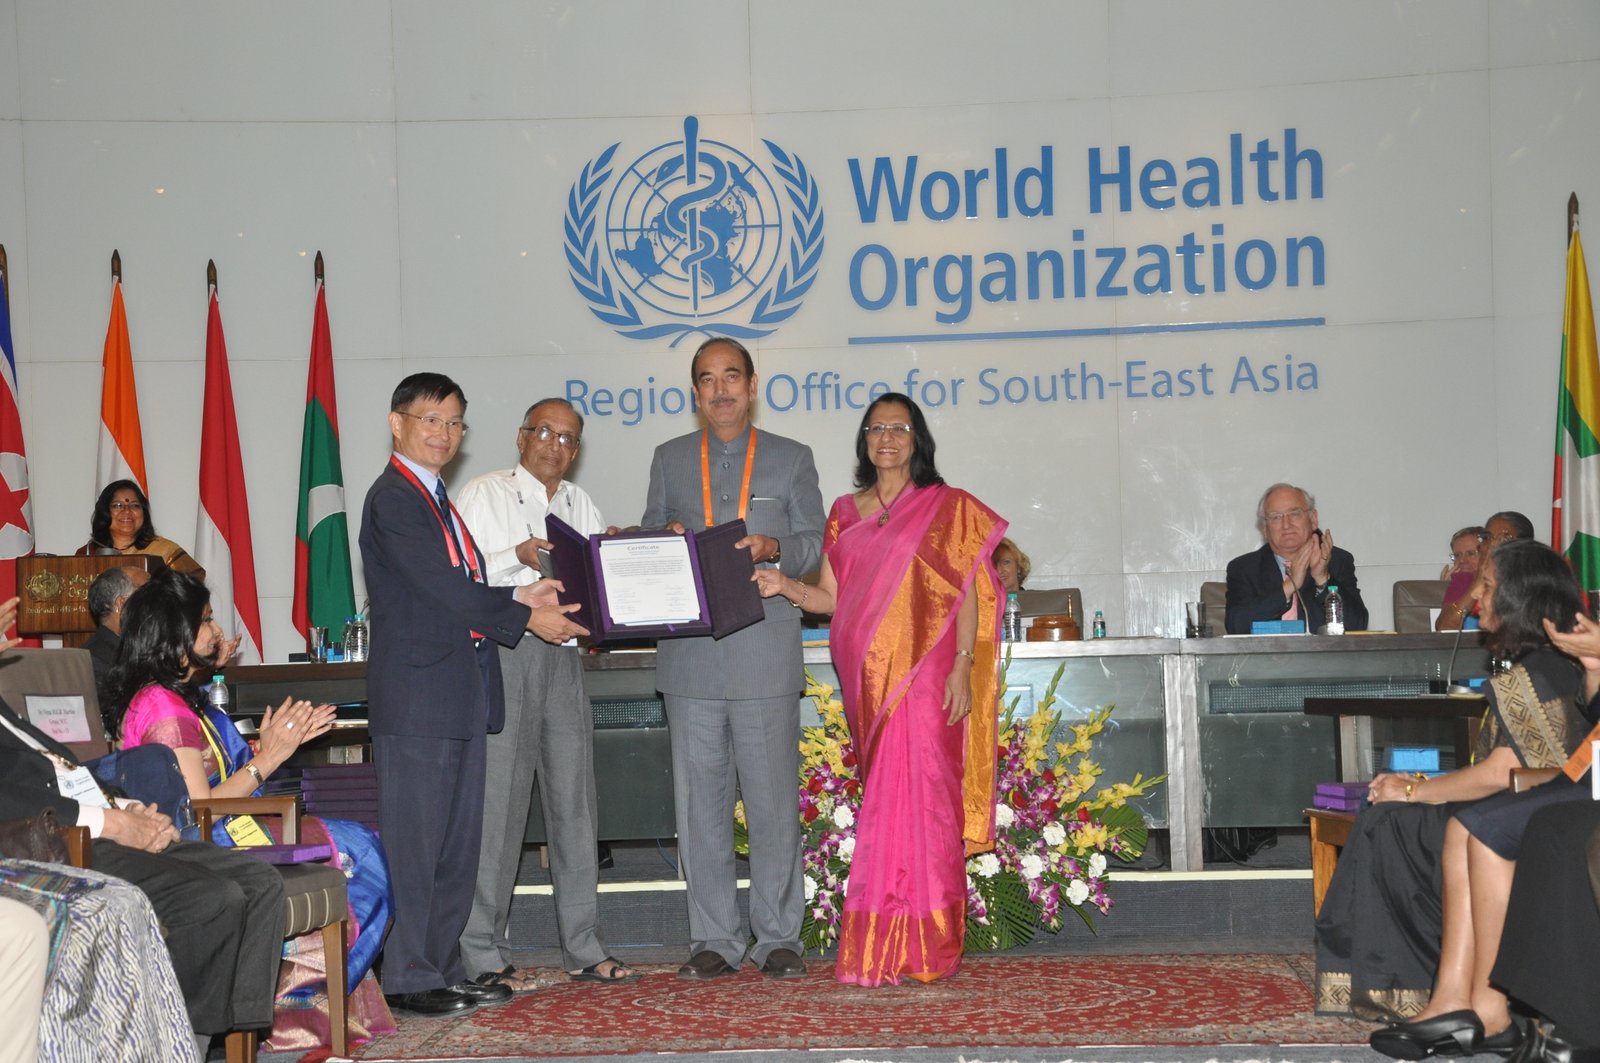 Big moment for India-Indian health minister, Mr Ghulam Nabi Azad receiving the WHO's polio free certificate at a historic event held at WHO Hq. 